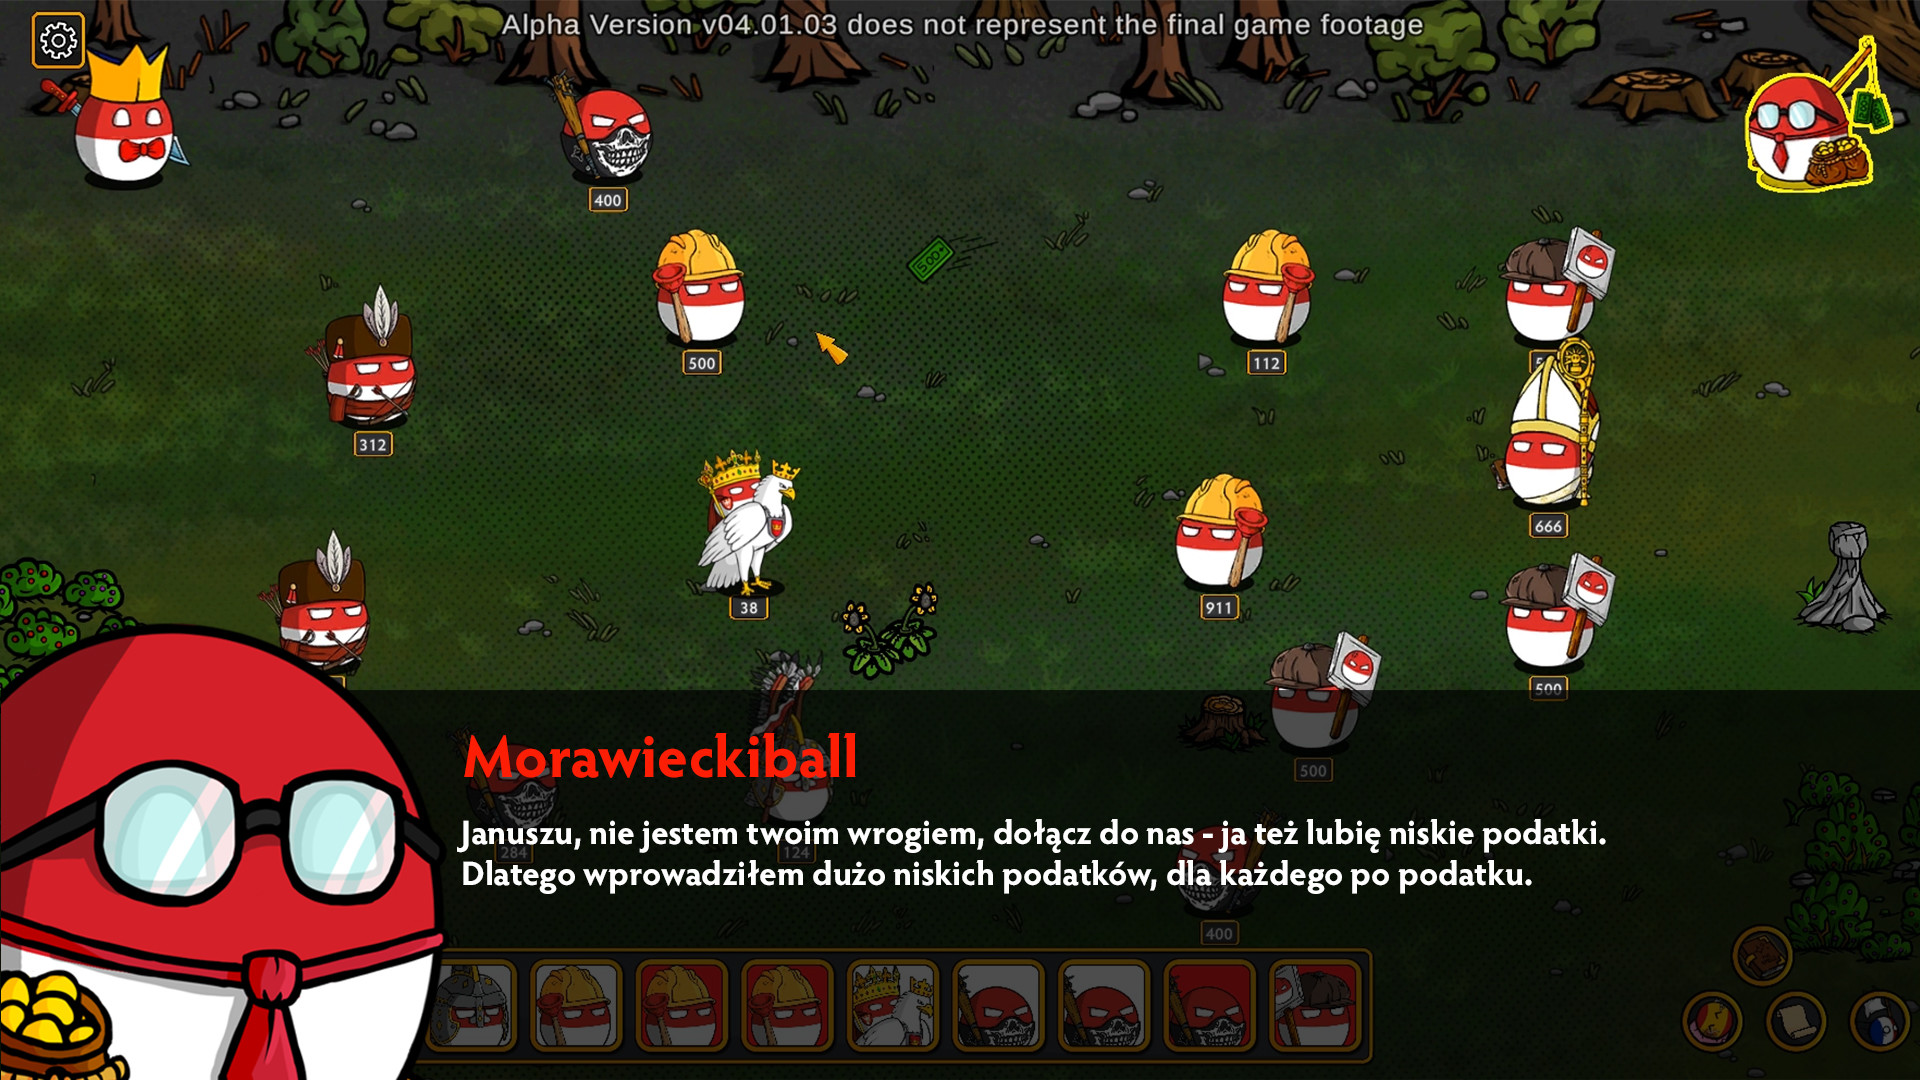 download countryballs heroes free for free